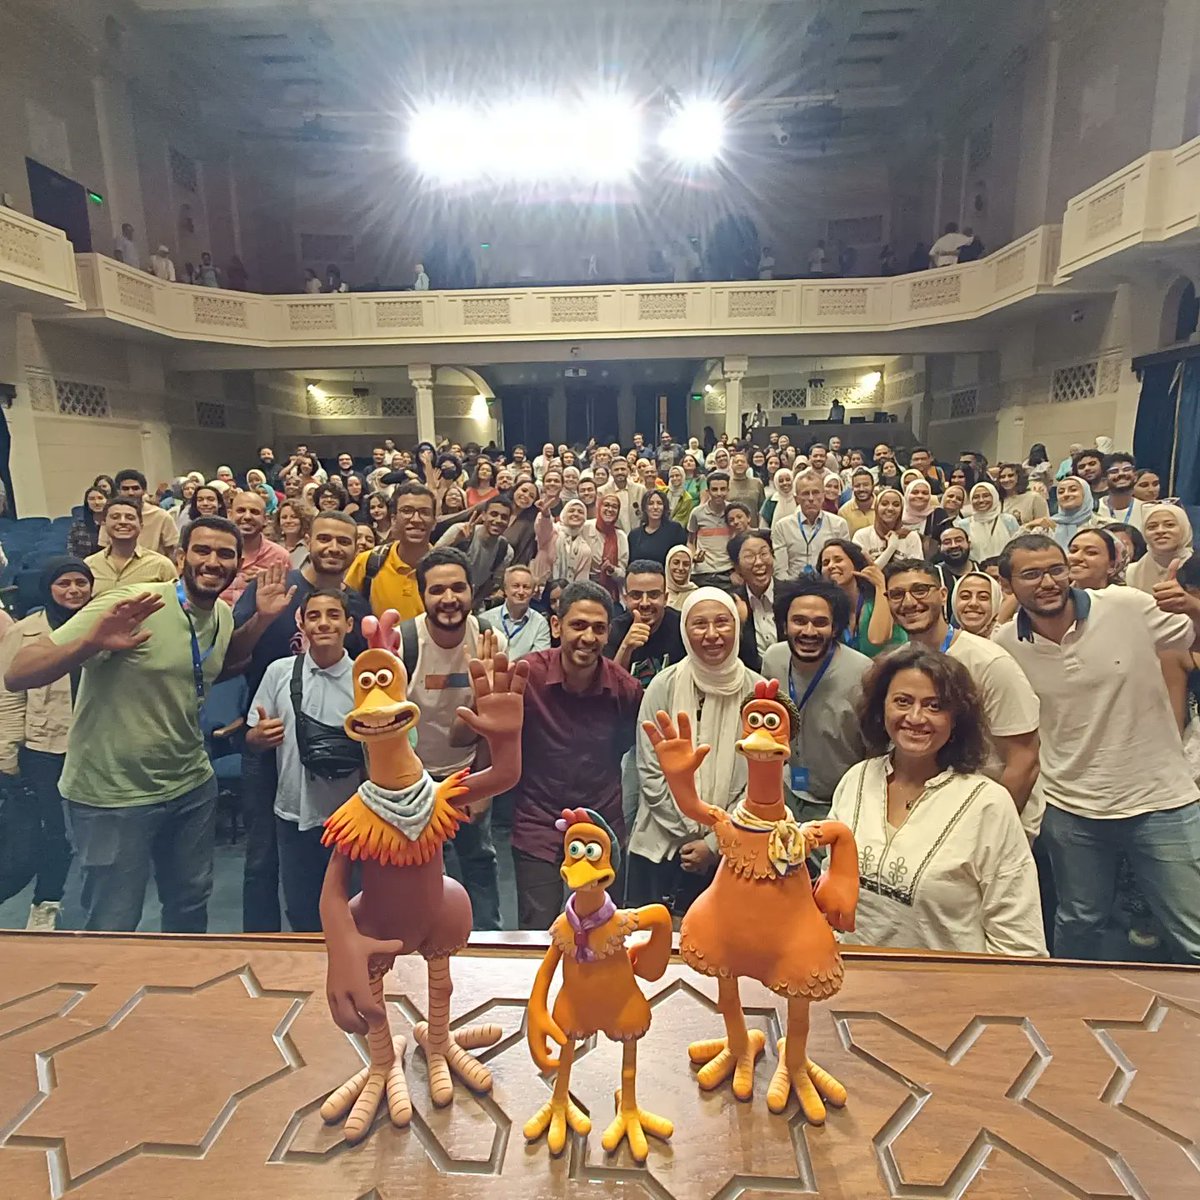 What an honour to talk at Animatex, Egypt tonight! A brilliant audience & festival! The warmth of the welcome, new animation friends made & the remarkable city of Cairo have been overwhelming! THANK YOU! Thank you @britishcouncil for supporting this! @aardman #animatex_festival